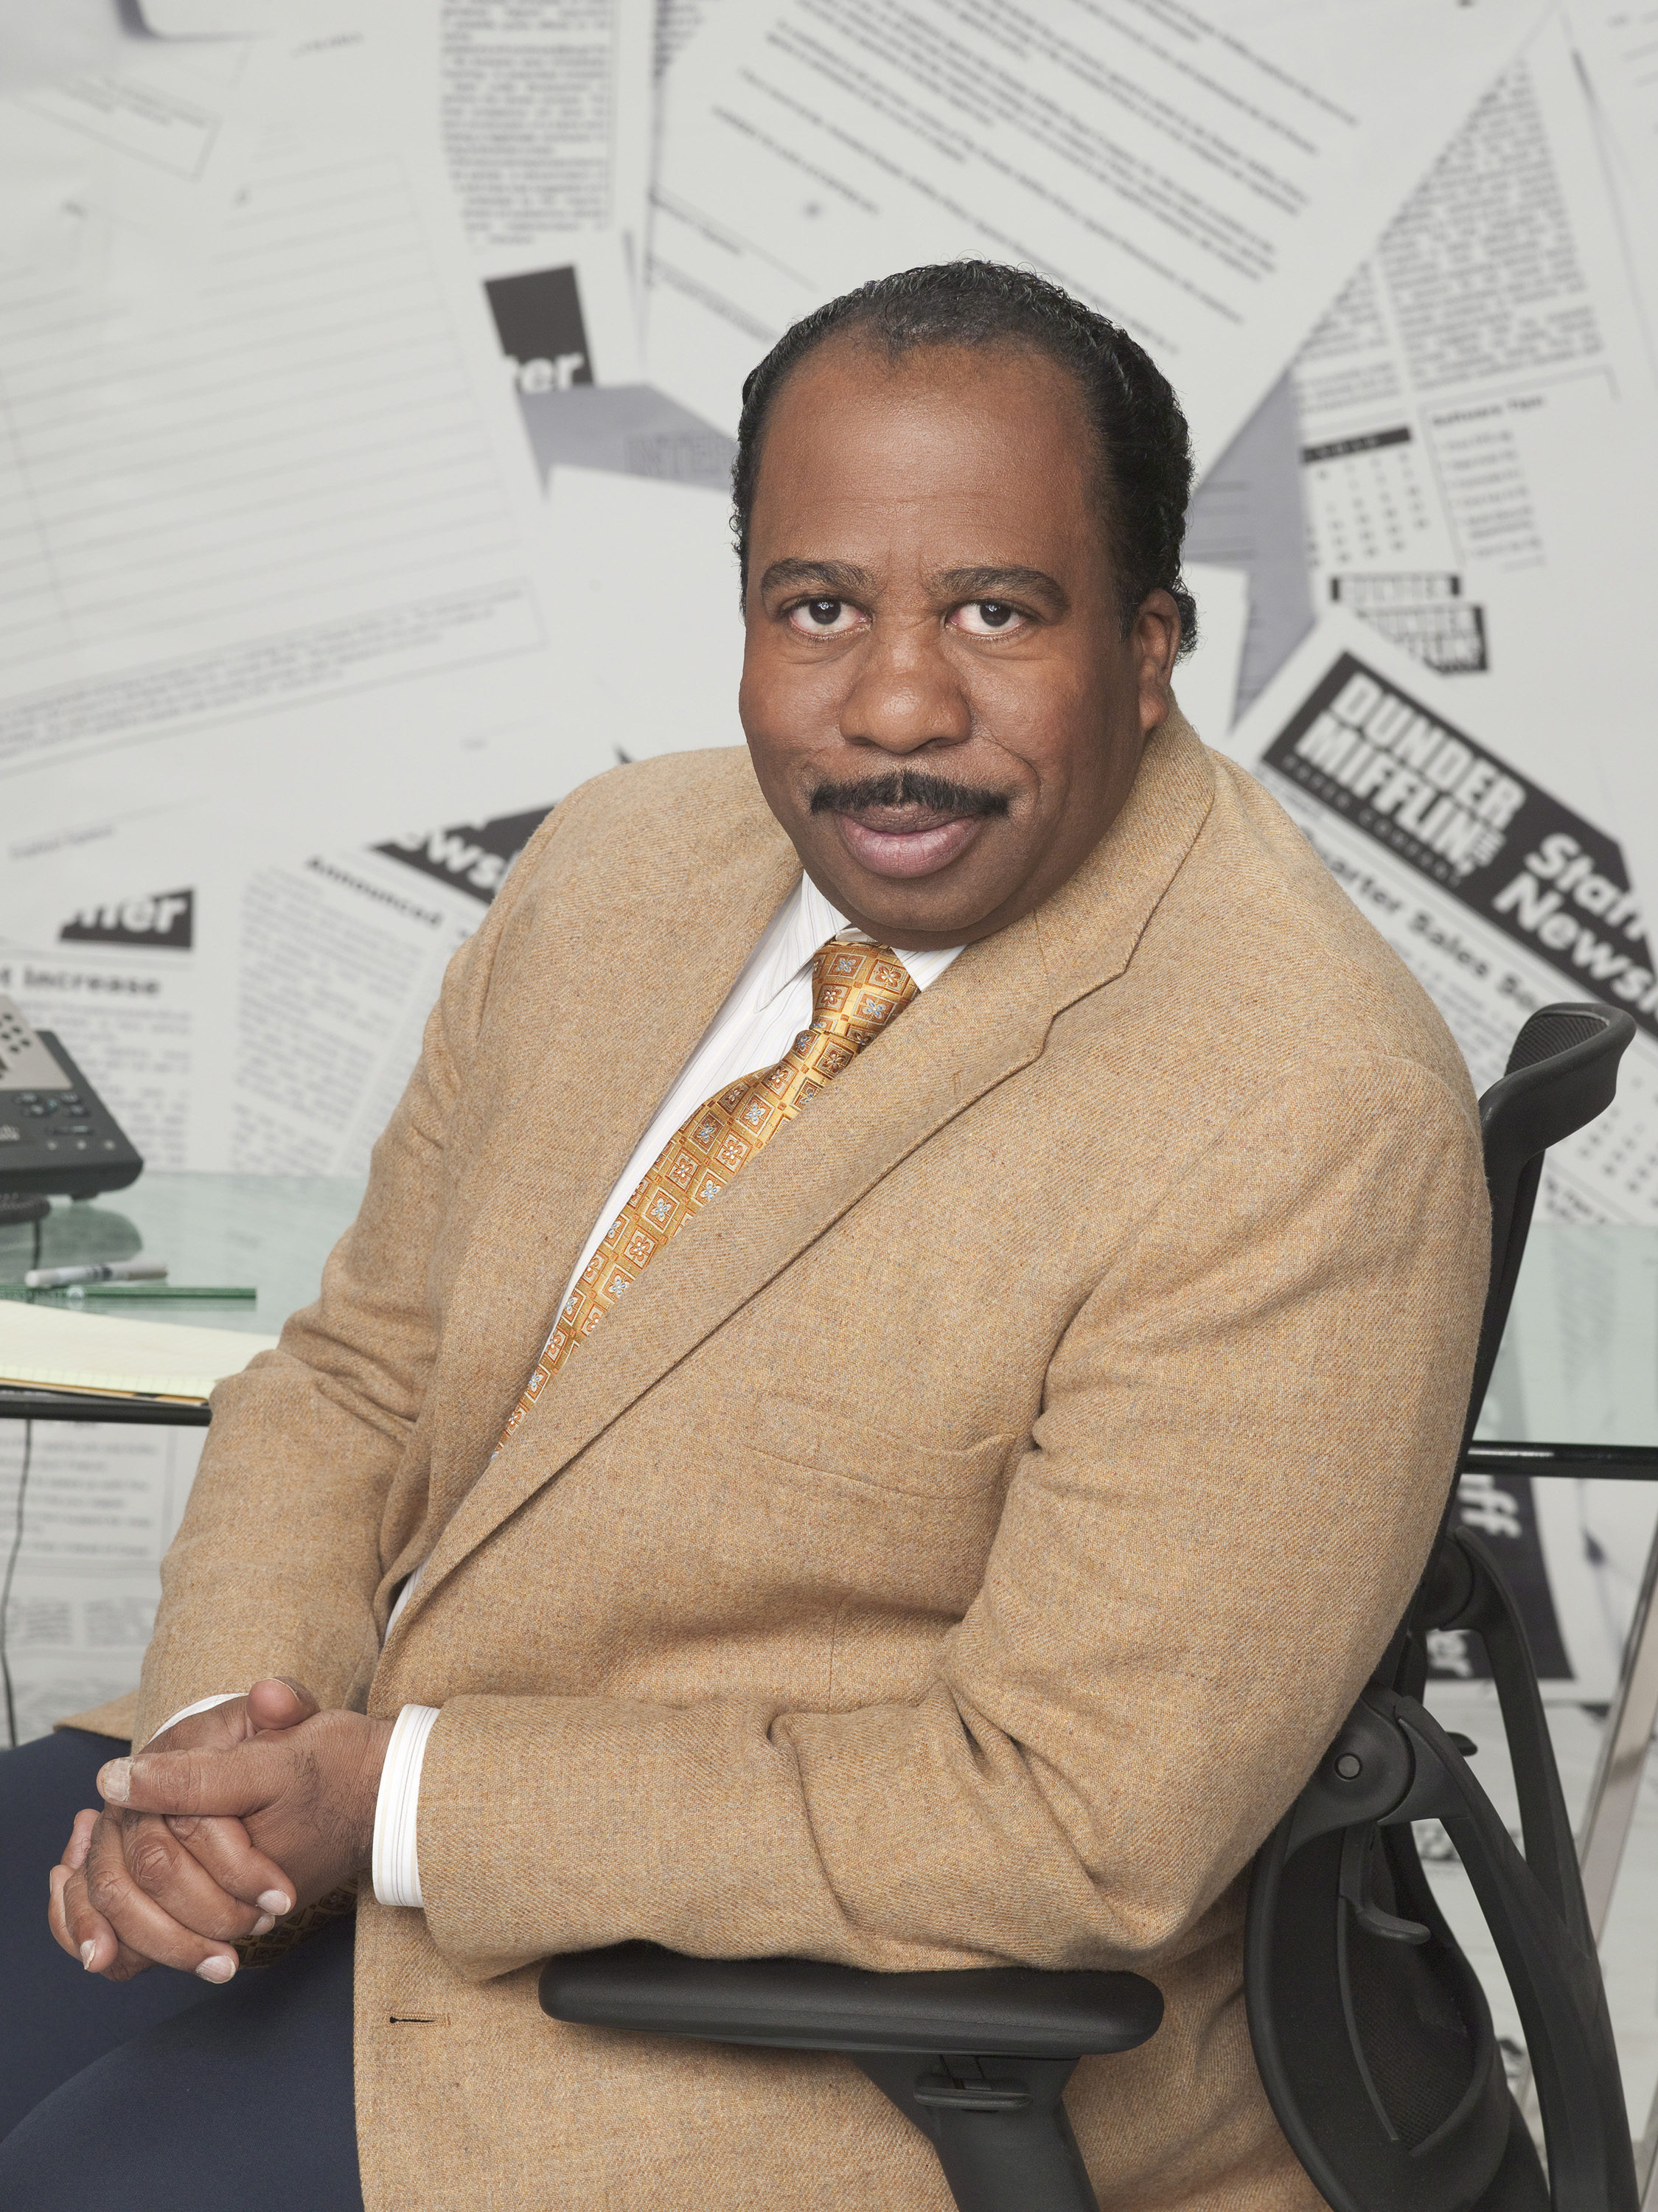 Fake Stanley - The Office 